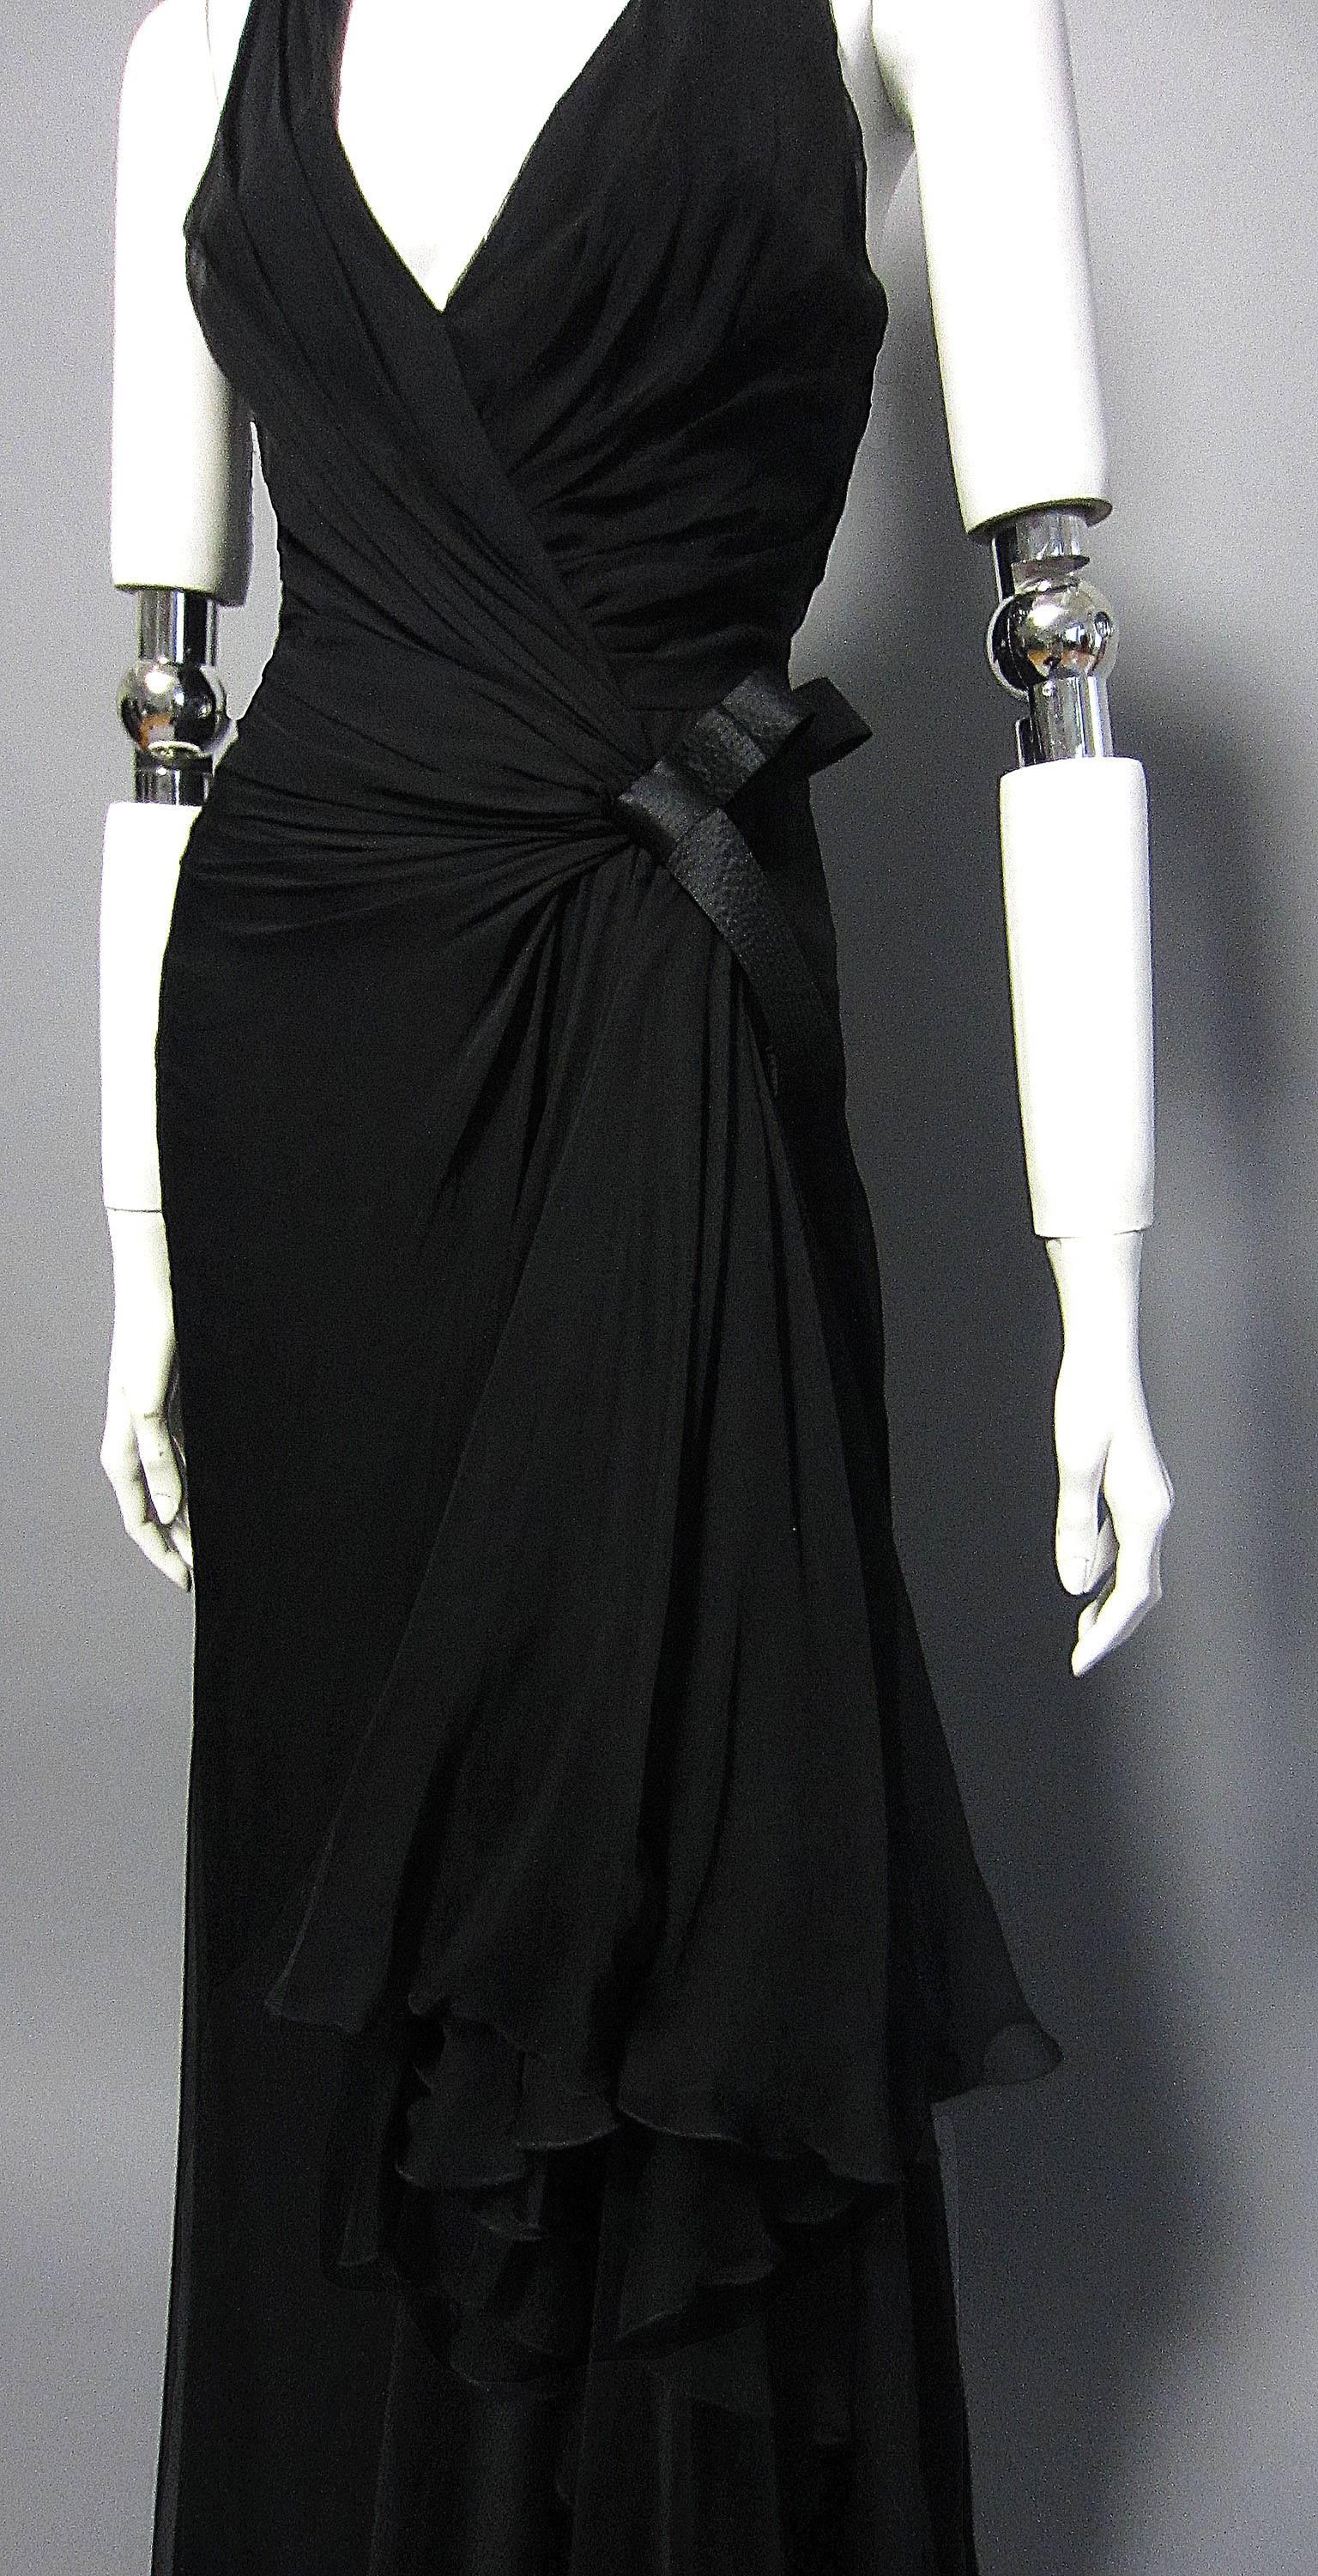 This VERSACE is sexy and sophisticated. The black chiffon is rushed along the bust, enhancing the halter shape of the neckline. The fabric gathers on the hip, where it is accented with a silk bow detail. From this point, extra panels of fabric fall